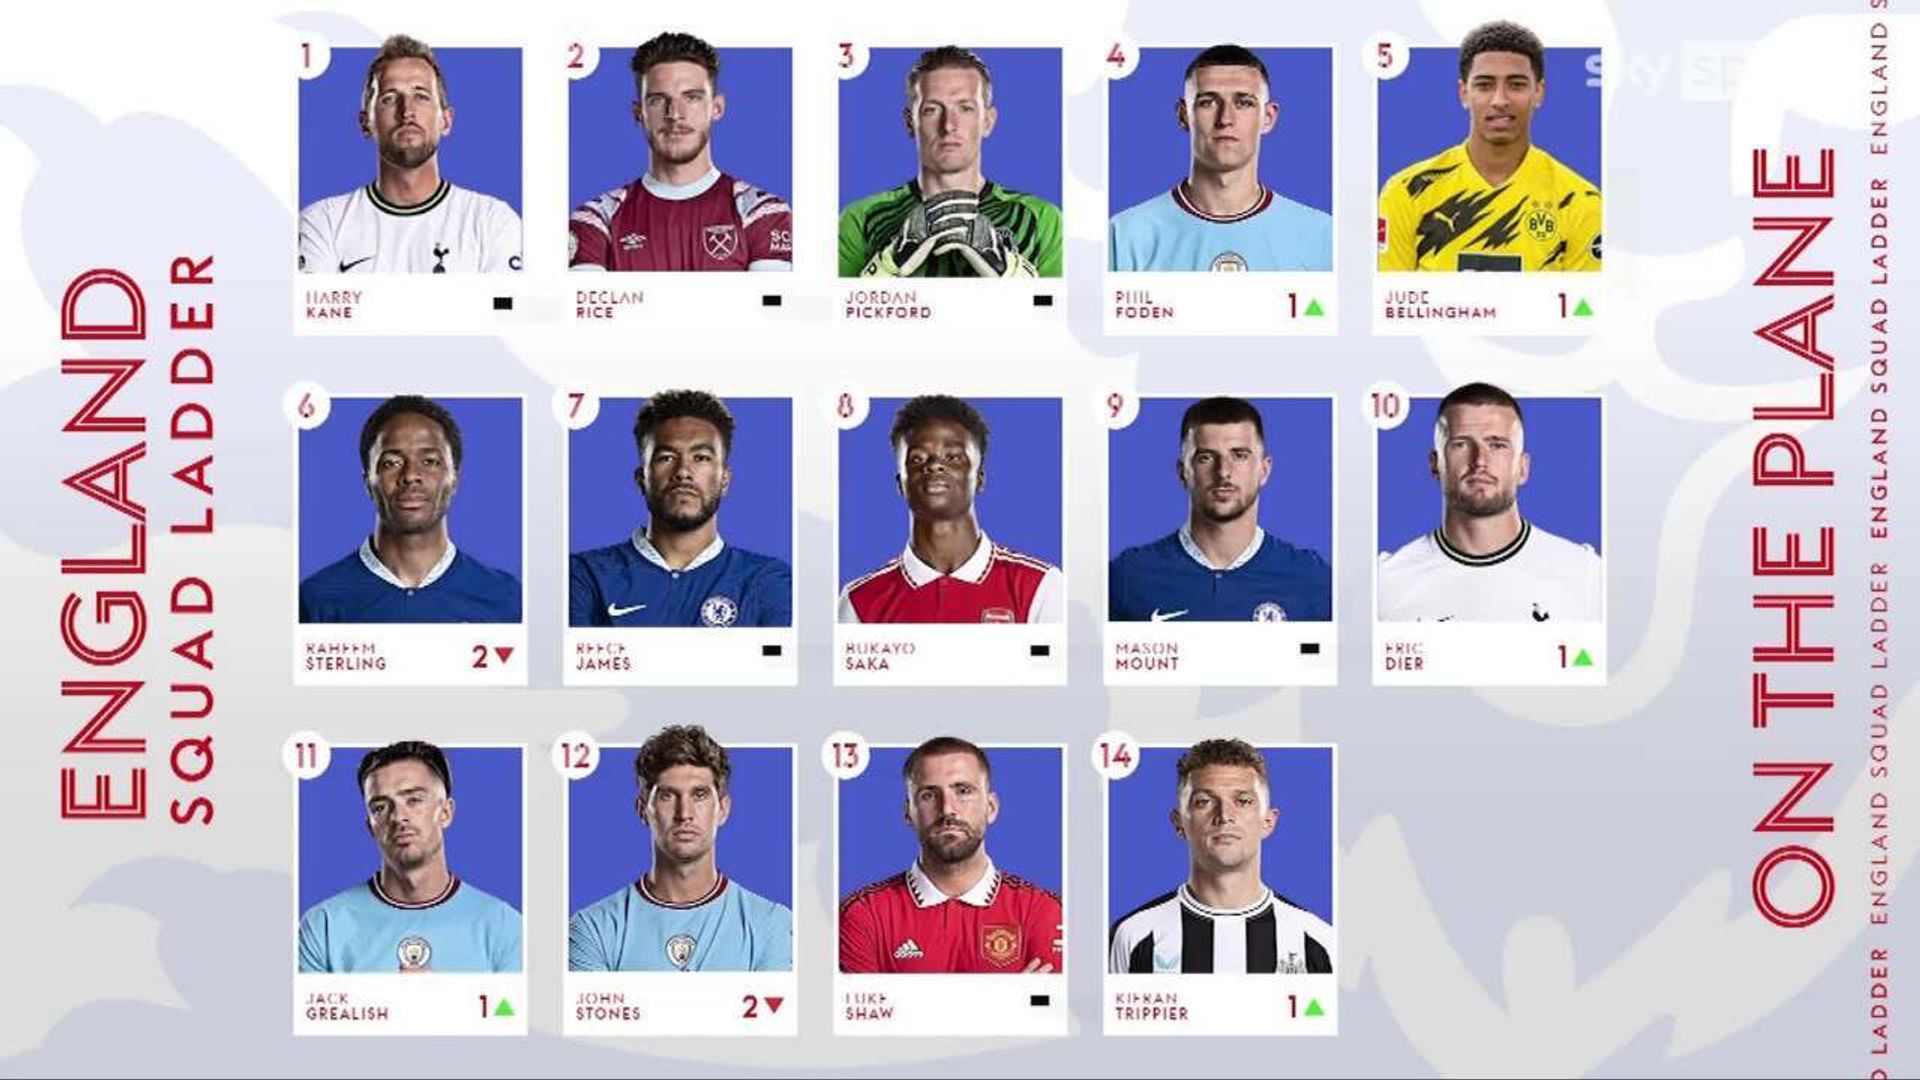 England World Cup squad ladder: Who's up and who's down?